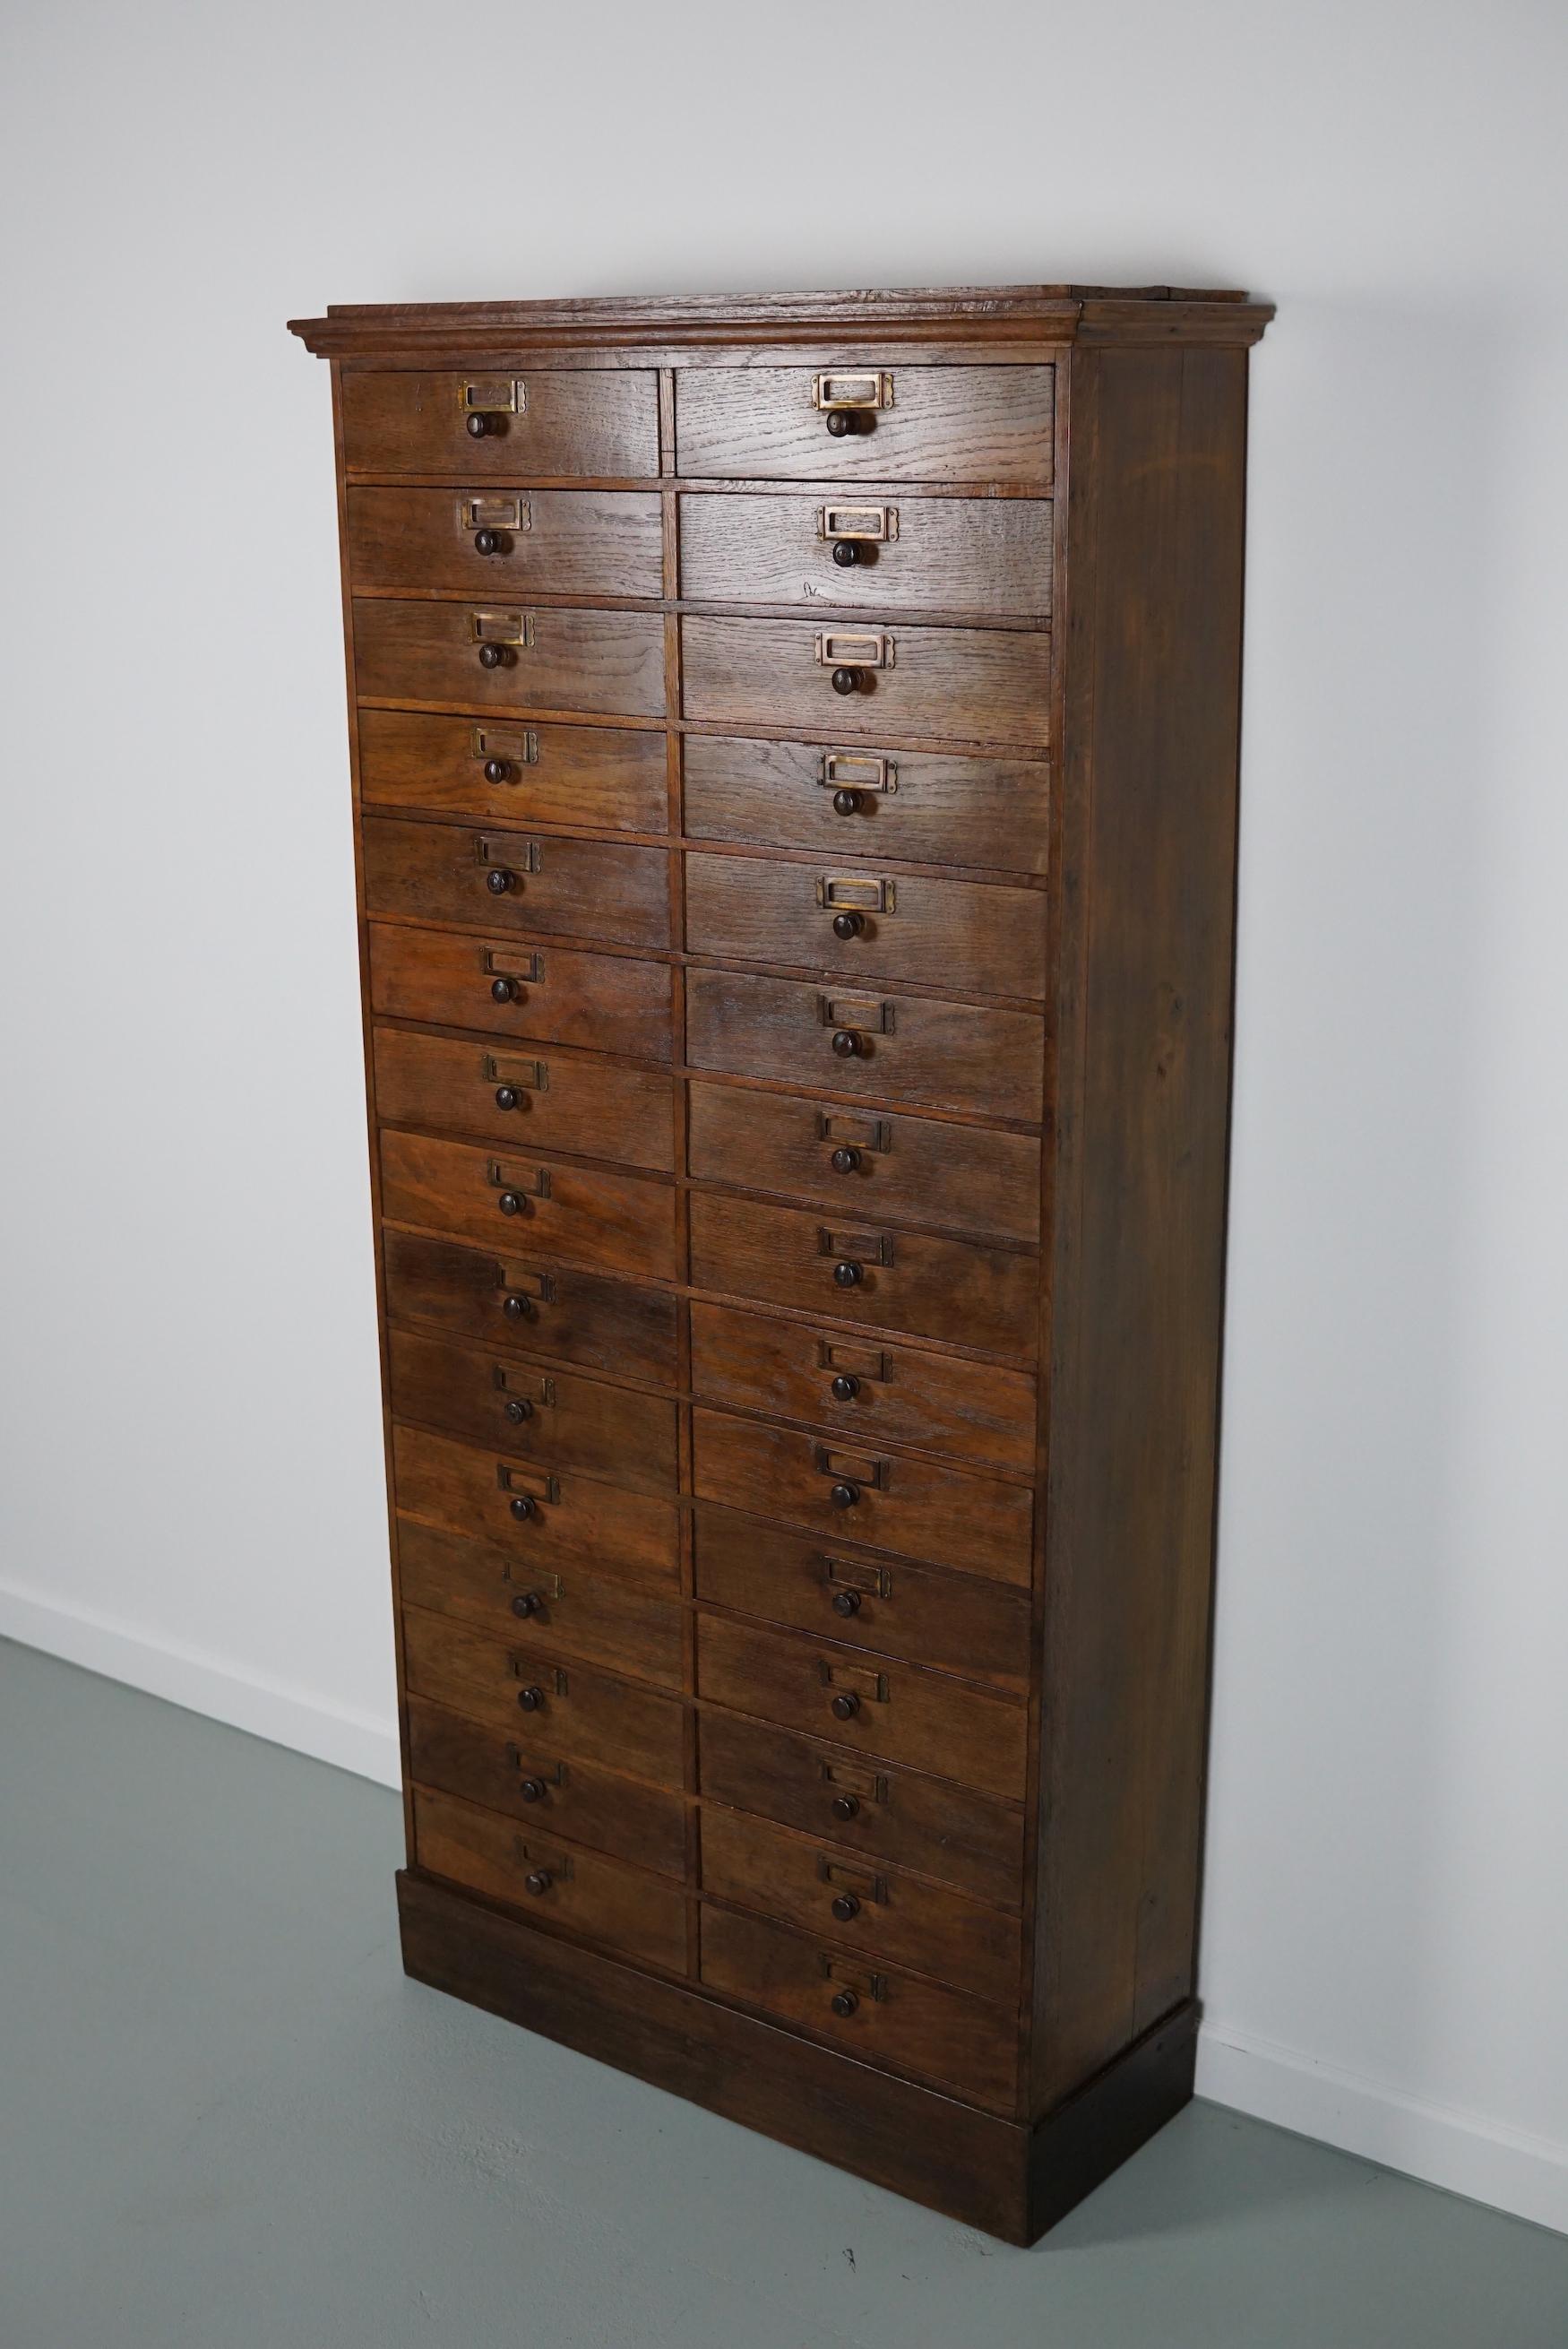 This cabinet was made in France from oak and pine in the early 20th century. It features 30 drawers with oak knobs and brass card holders. It was used to store parts in a watchmaker / jewelry workshop.